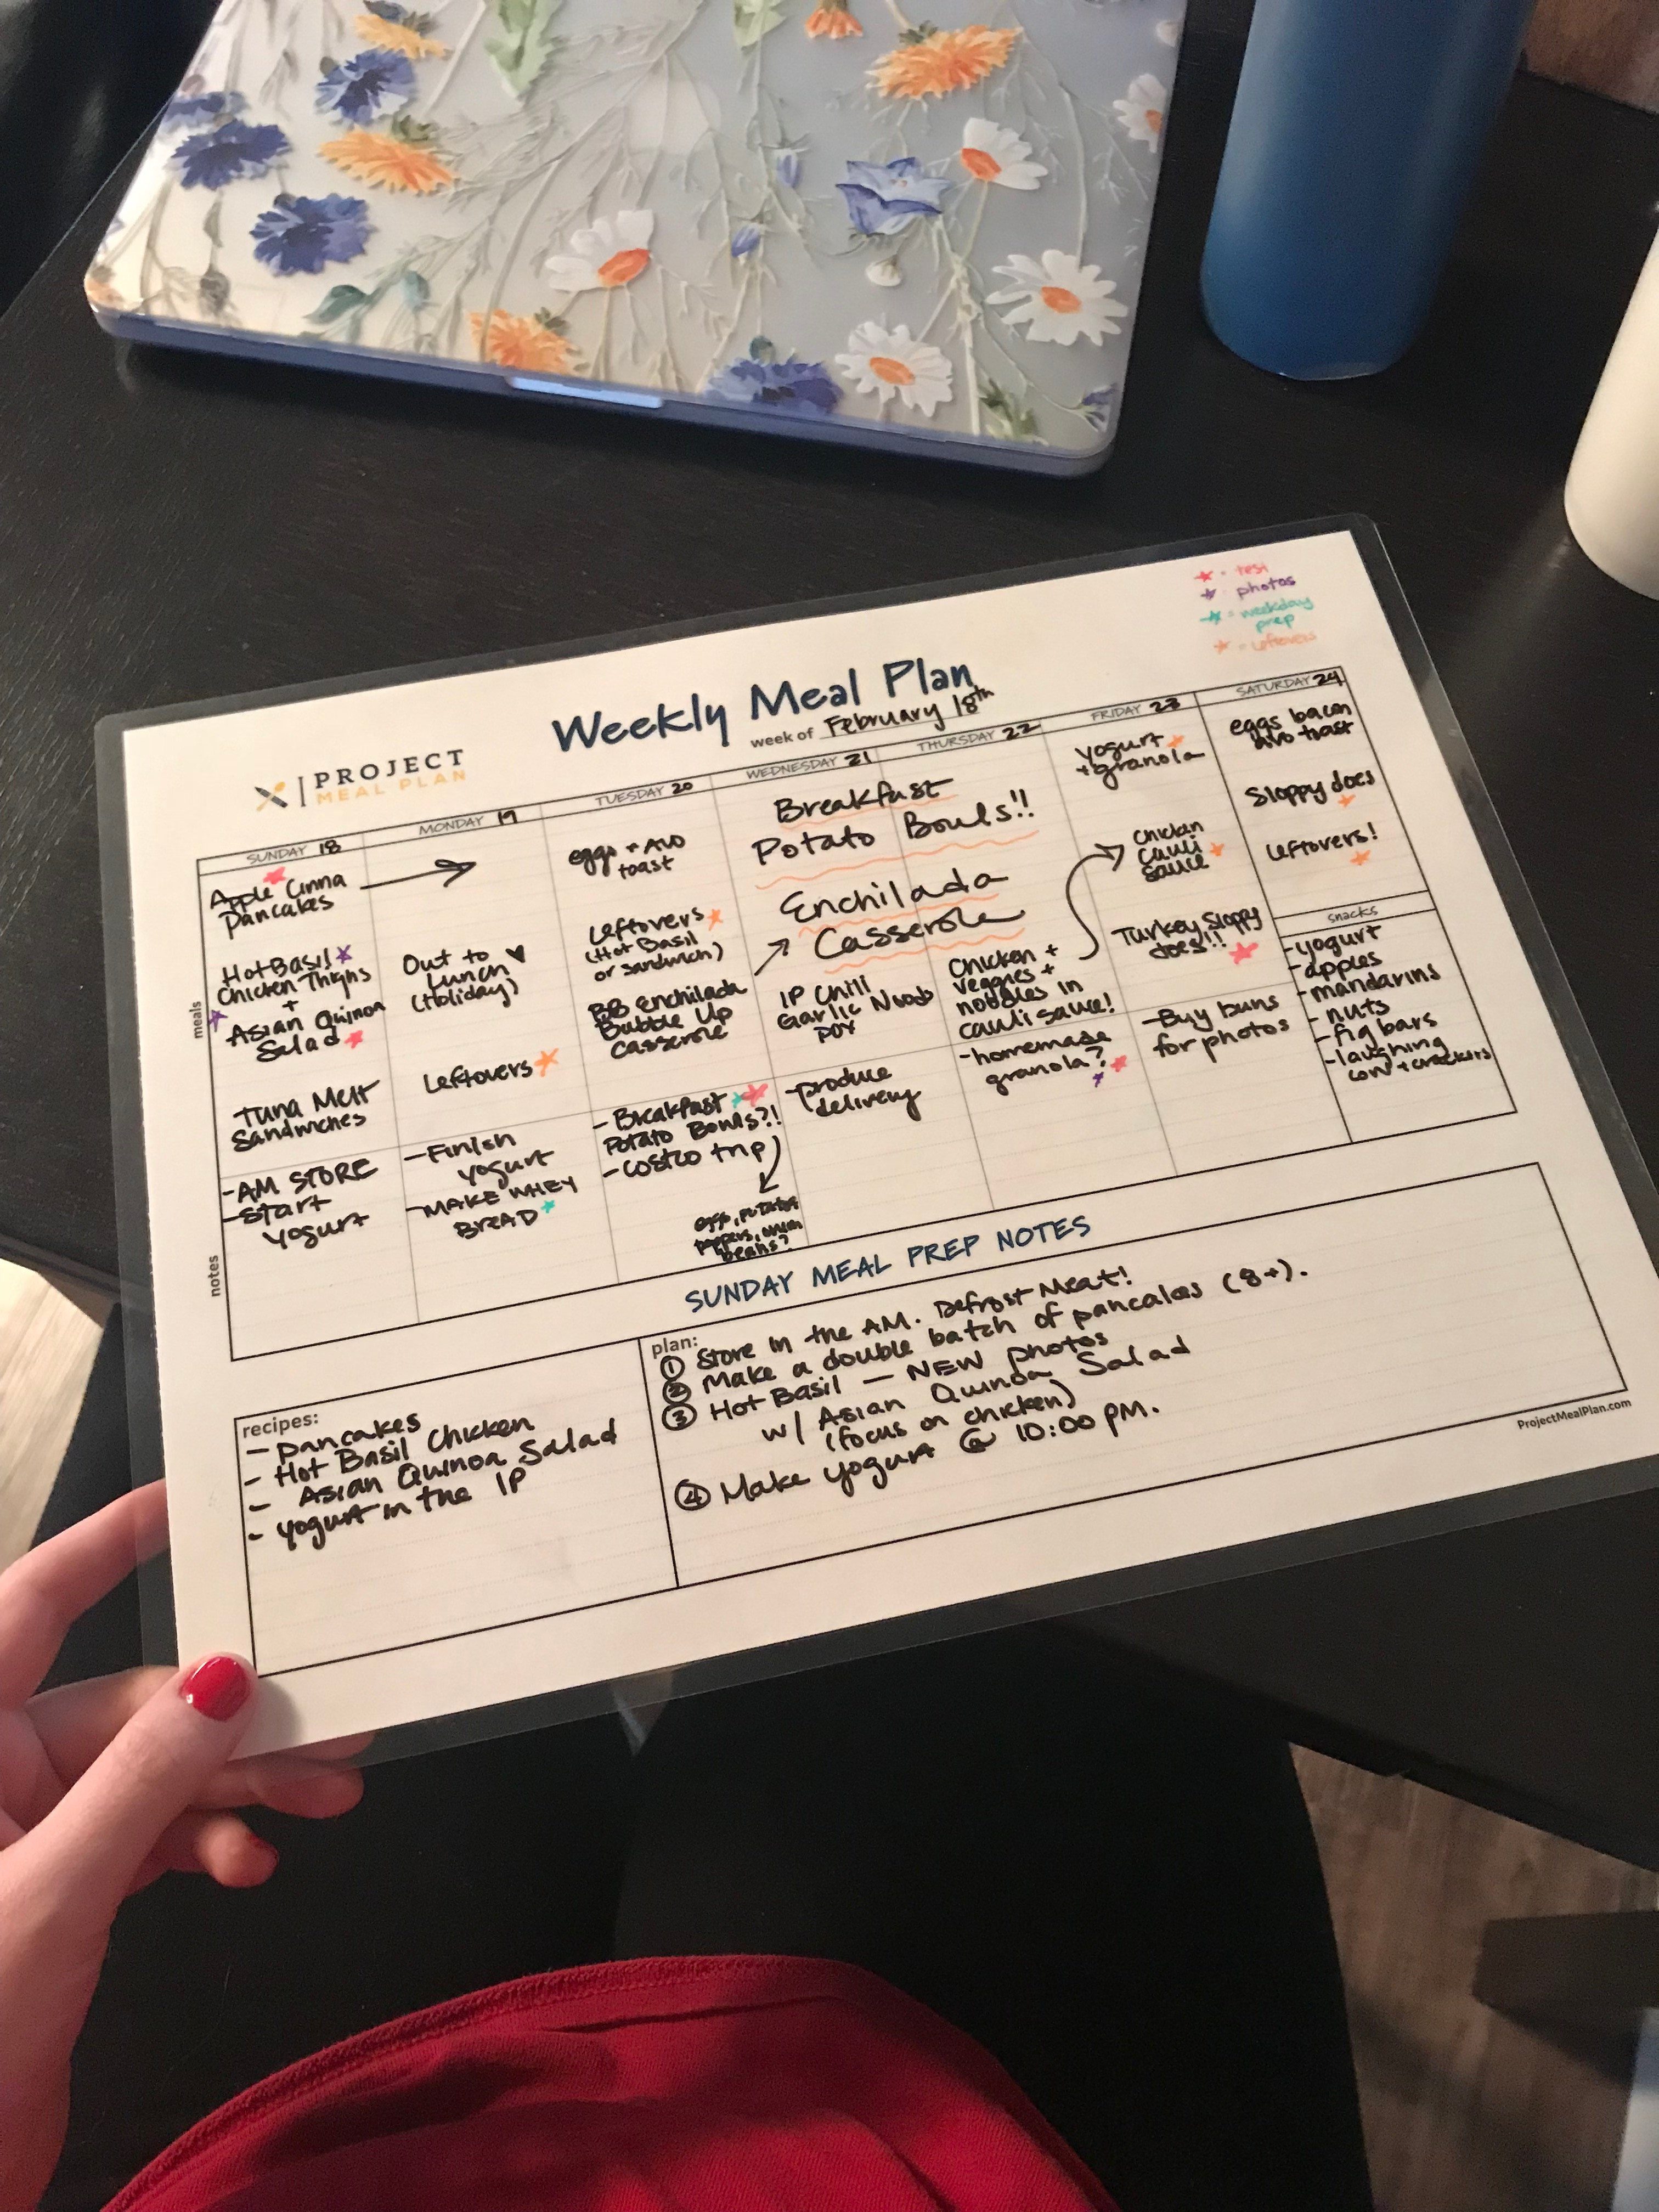 A laminated chart with a handwritten meal plan showing breakfast lunch and dinner for the week of February 18th.